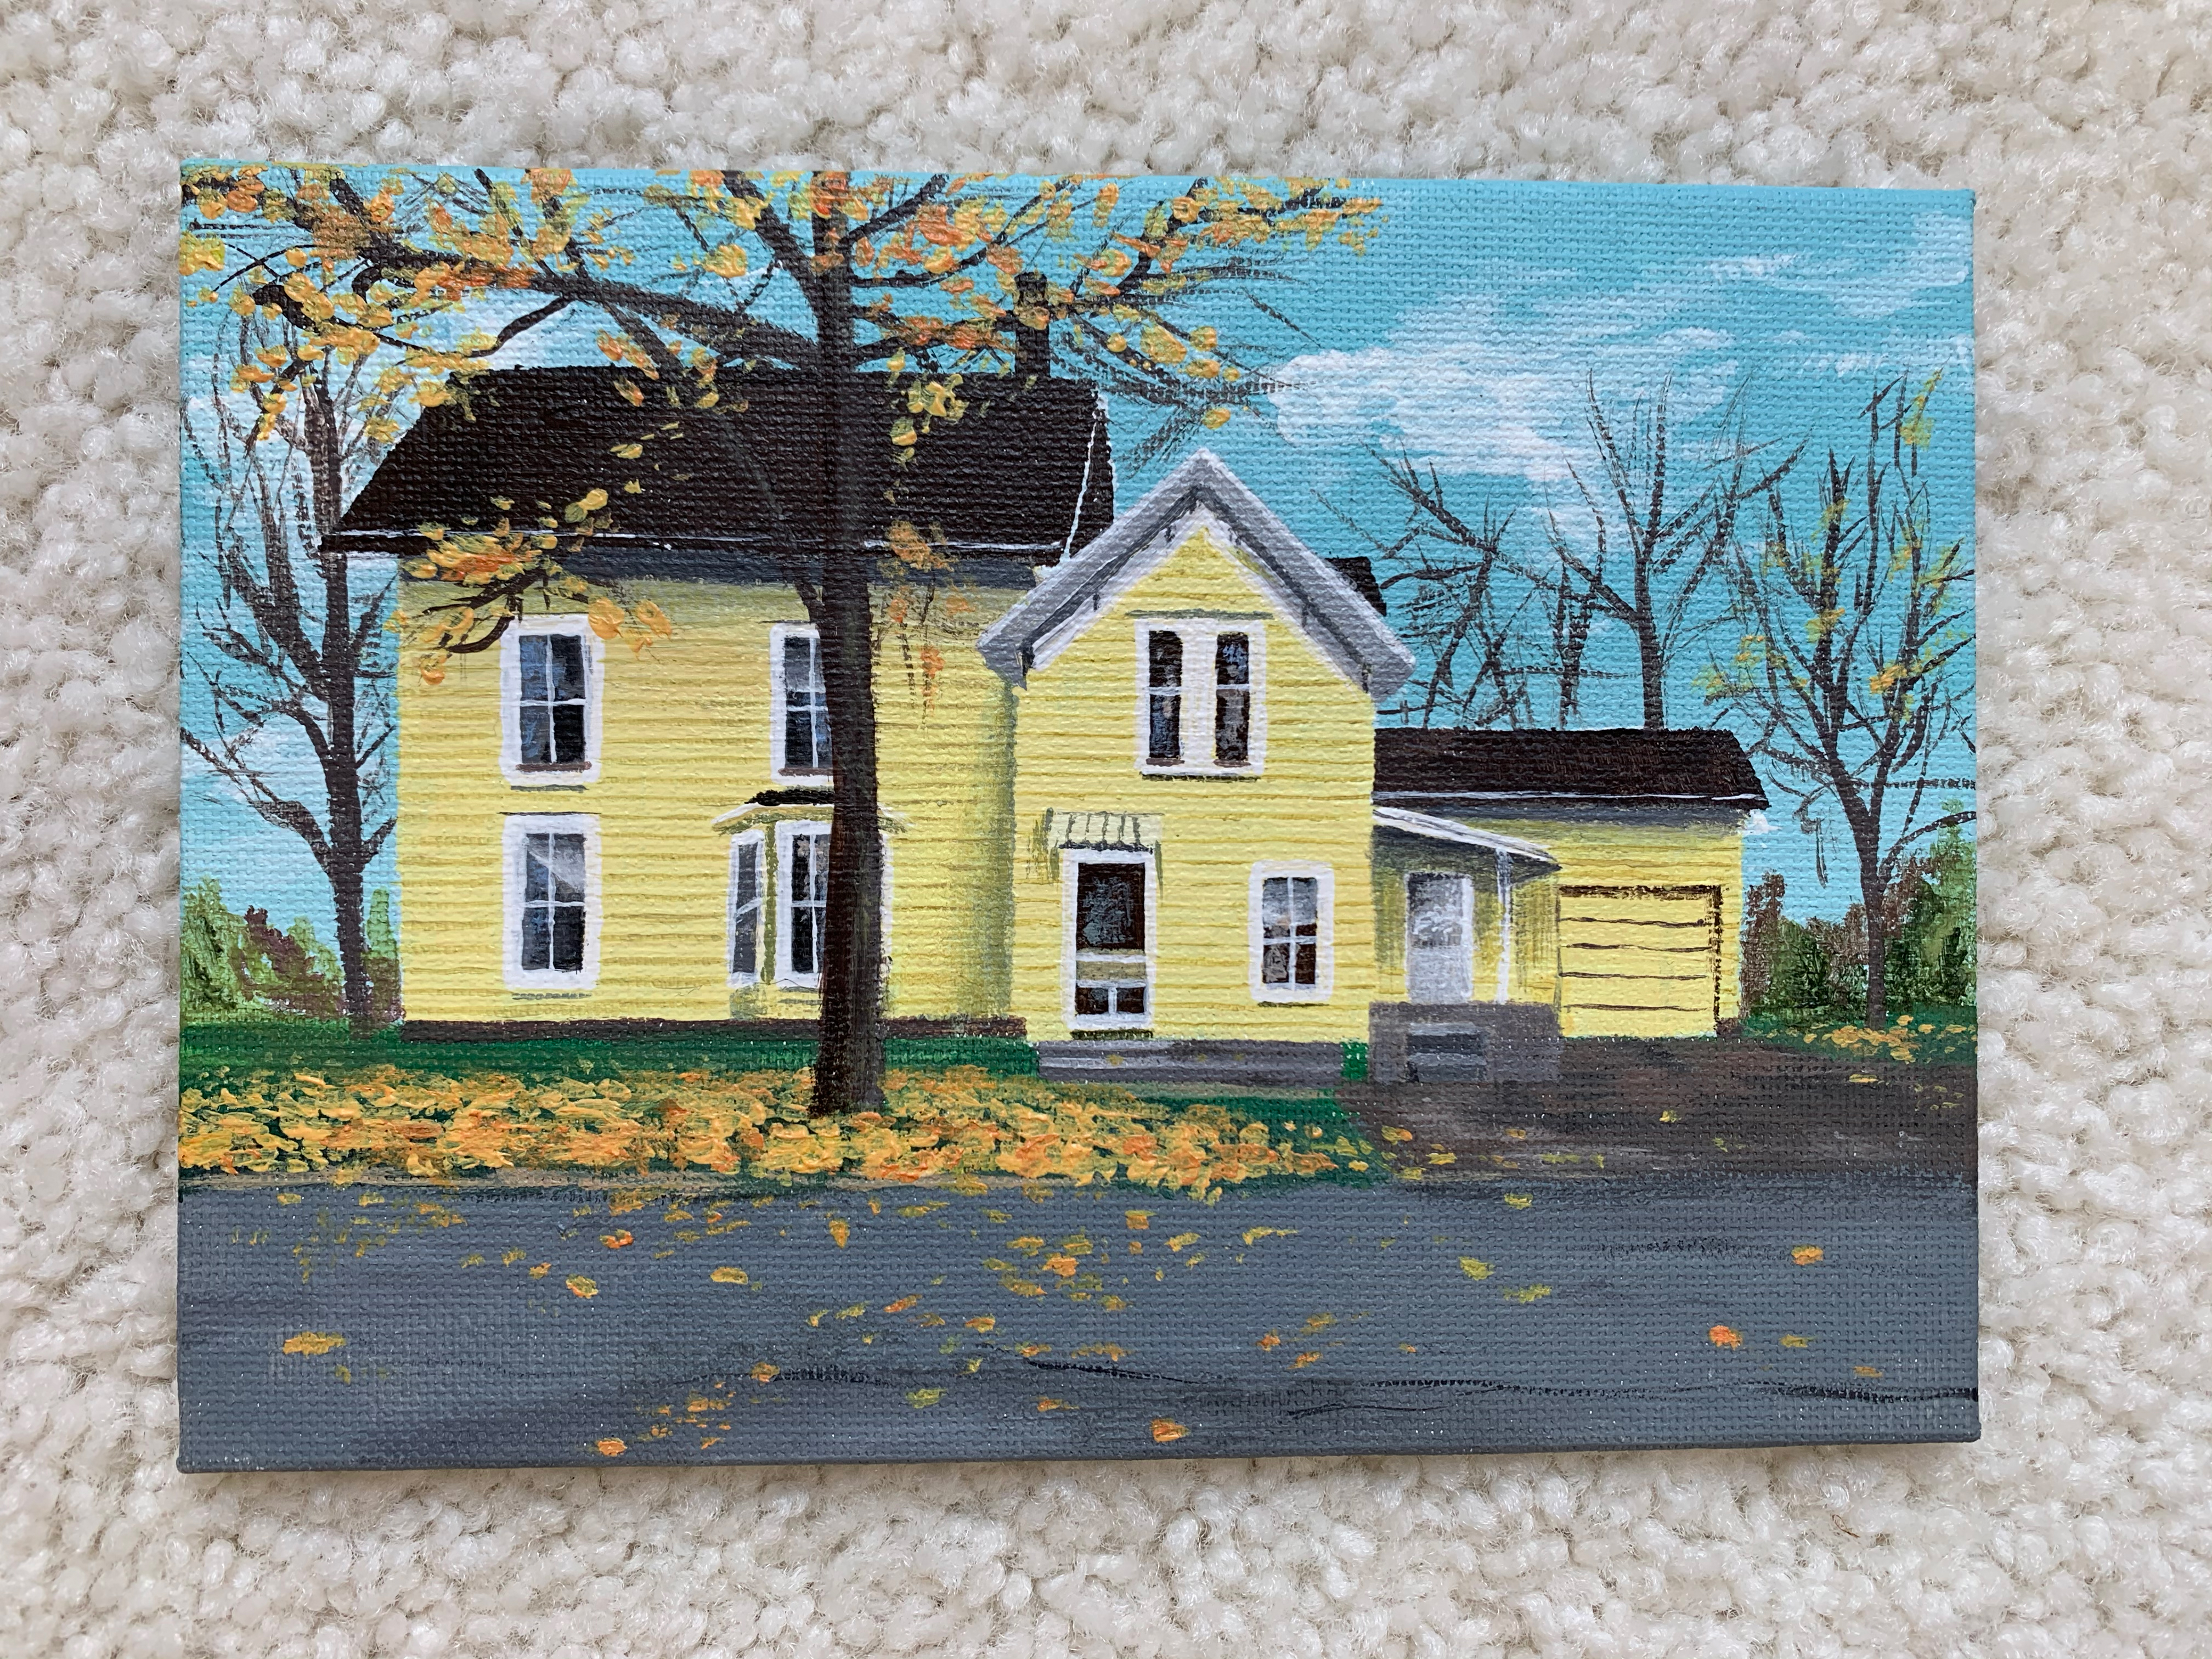 Barb's house tiny painting.